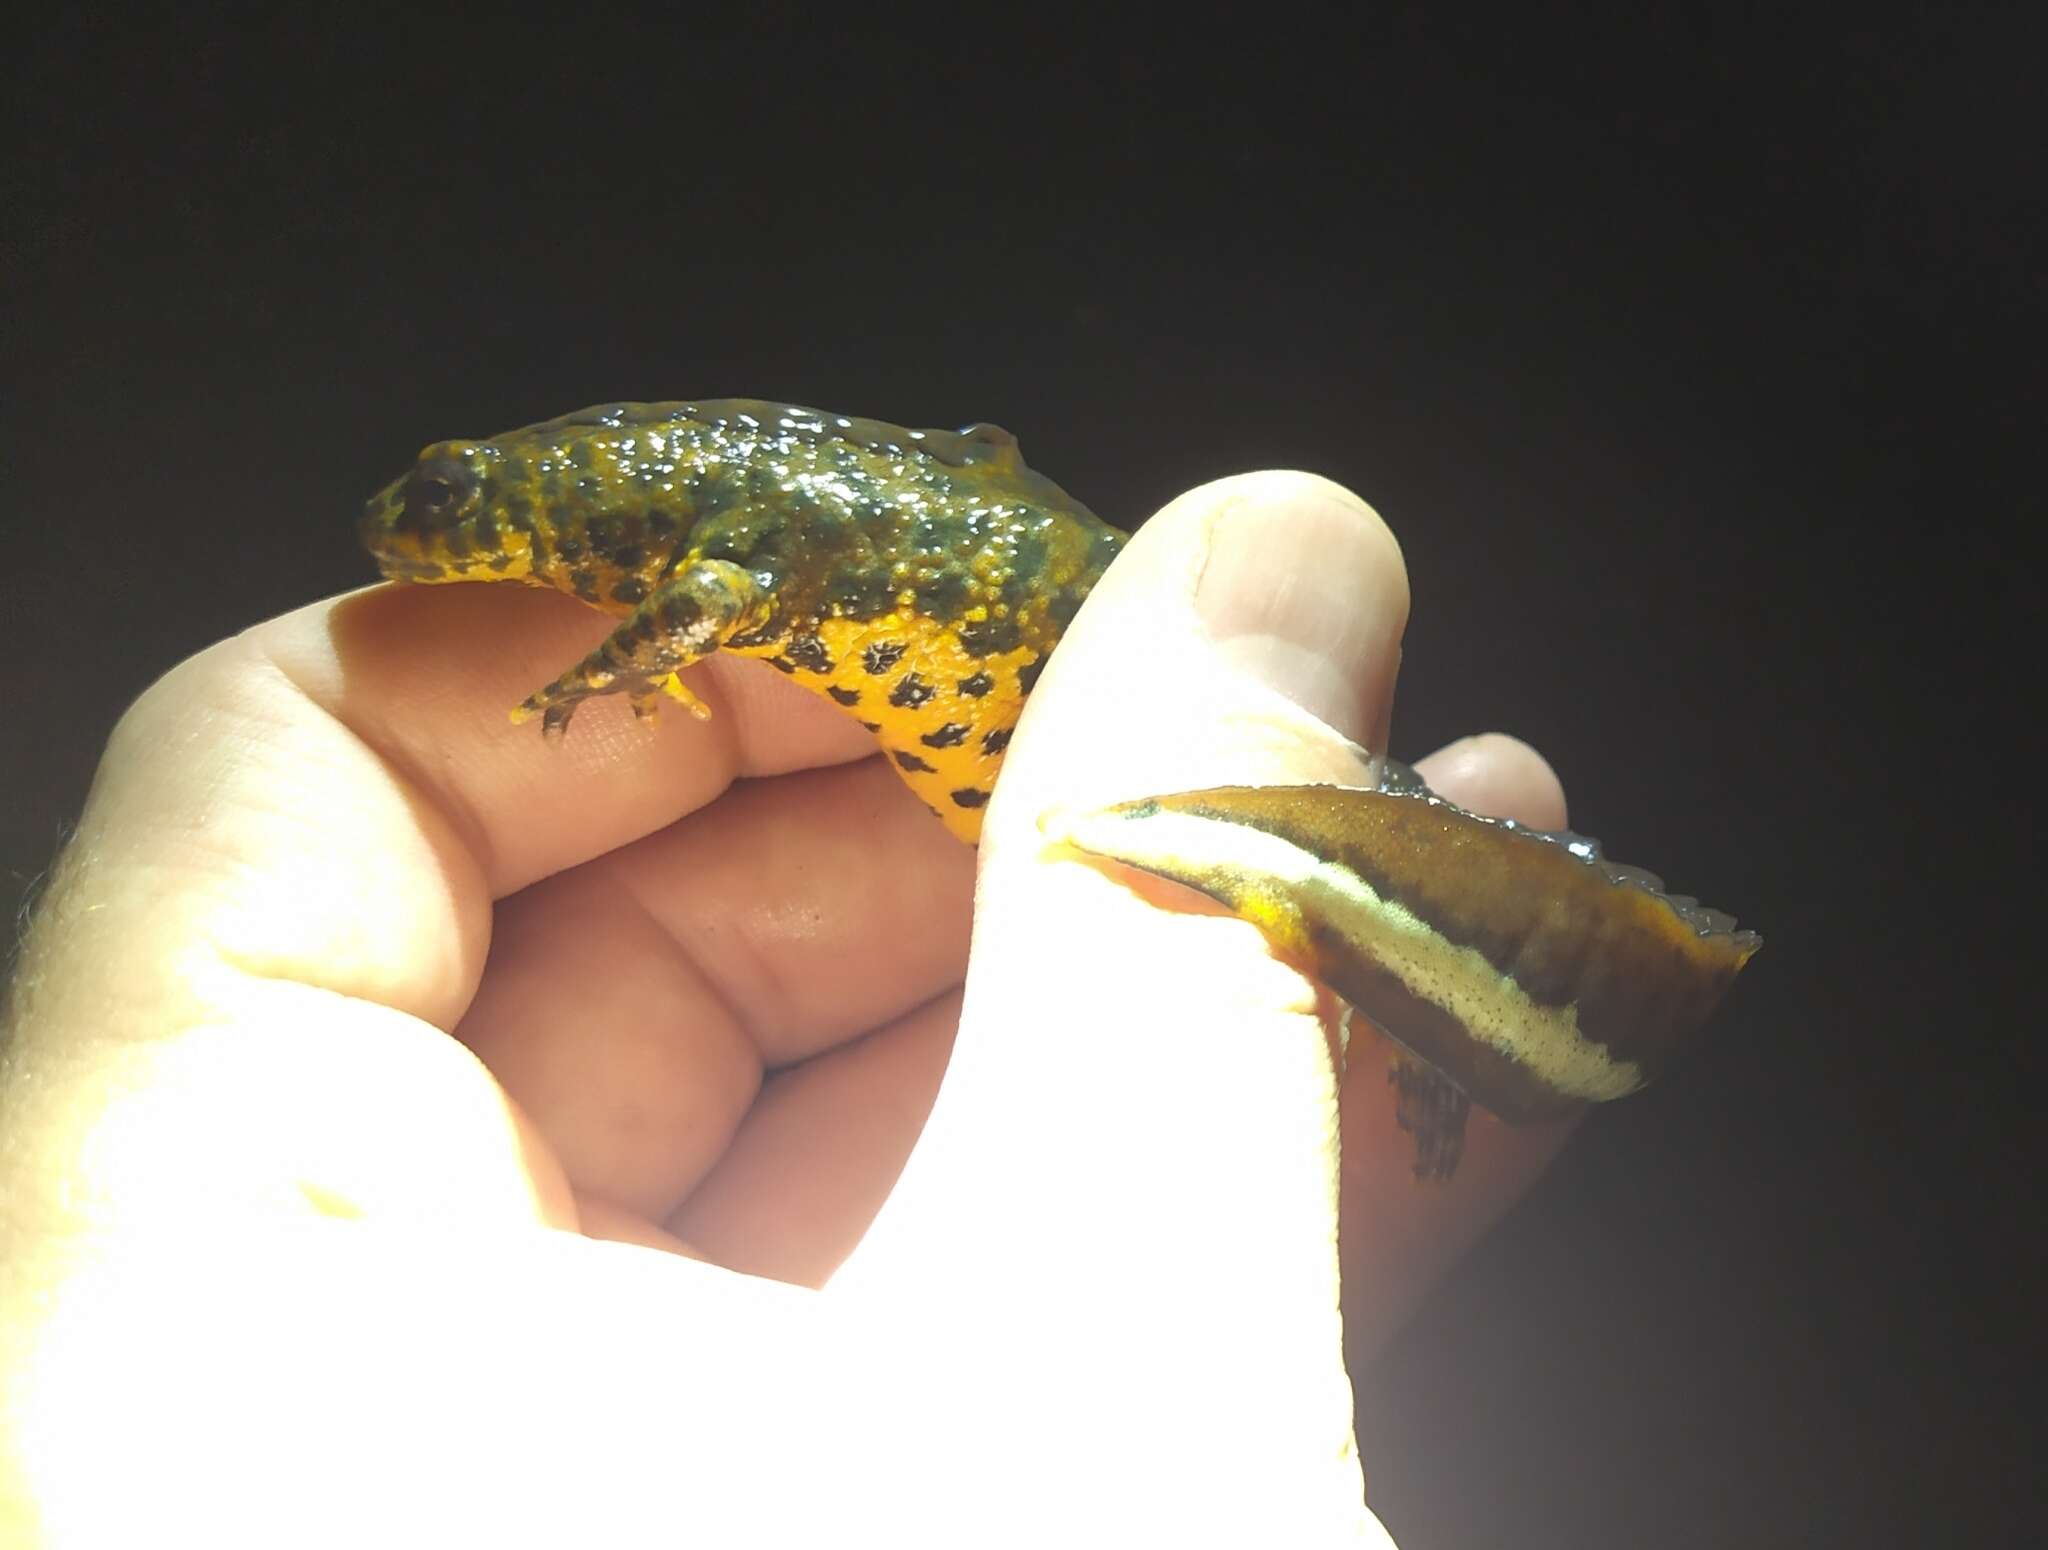 Image of Southern Crested Newt